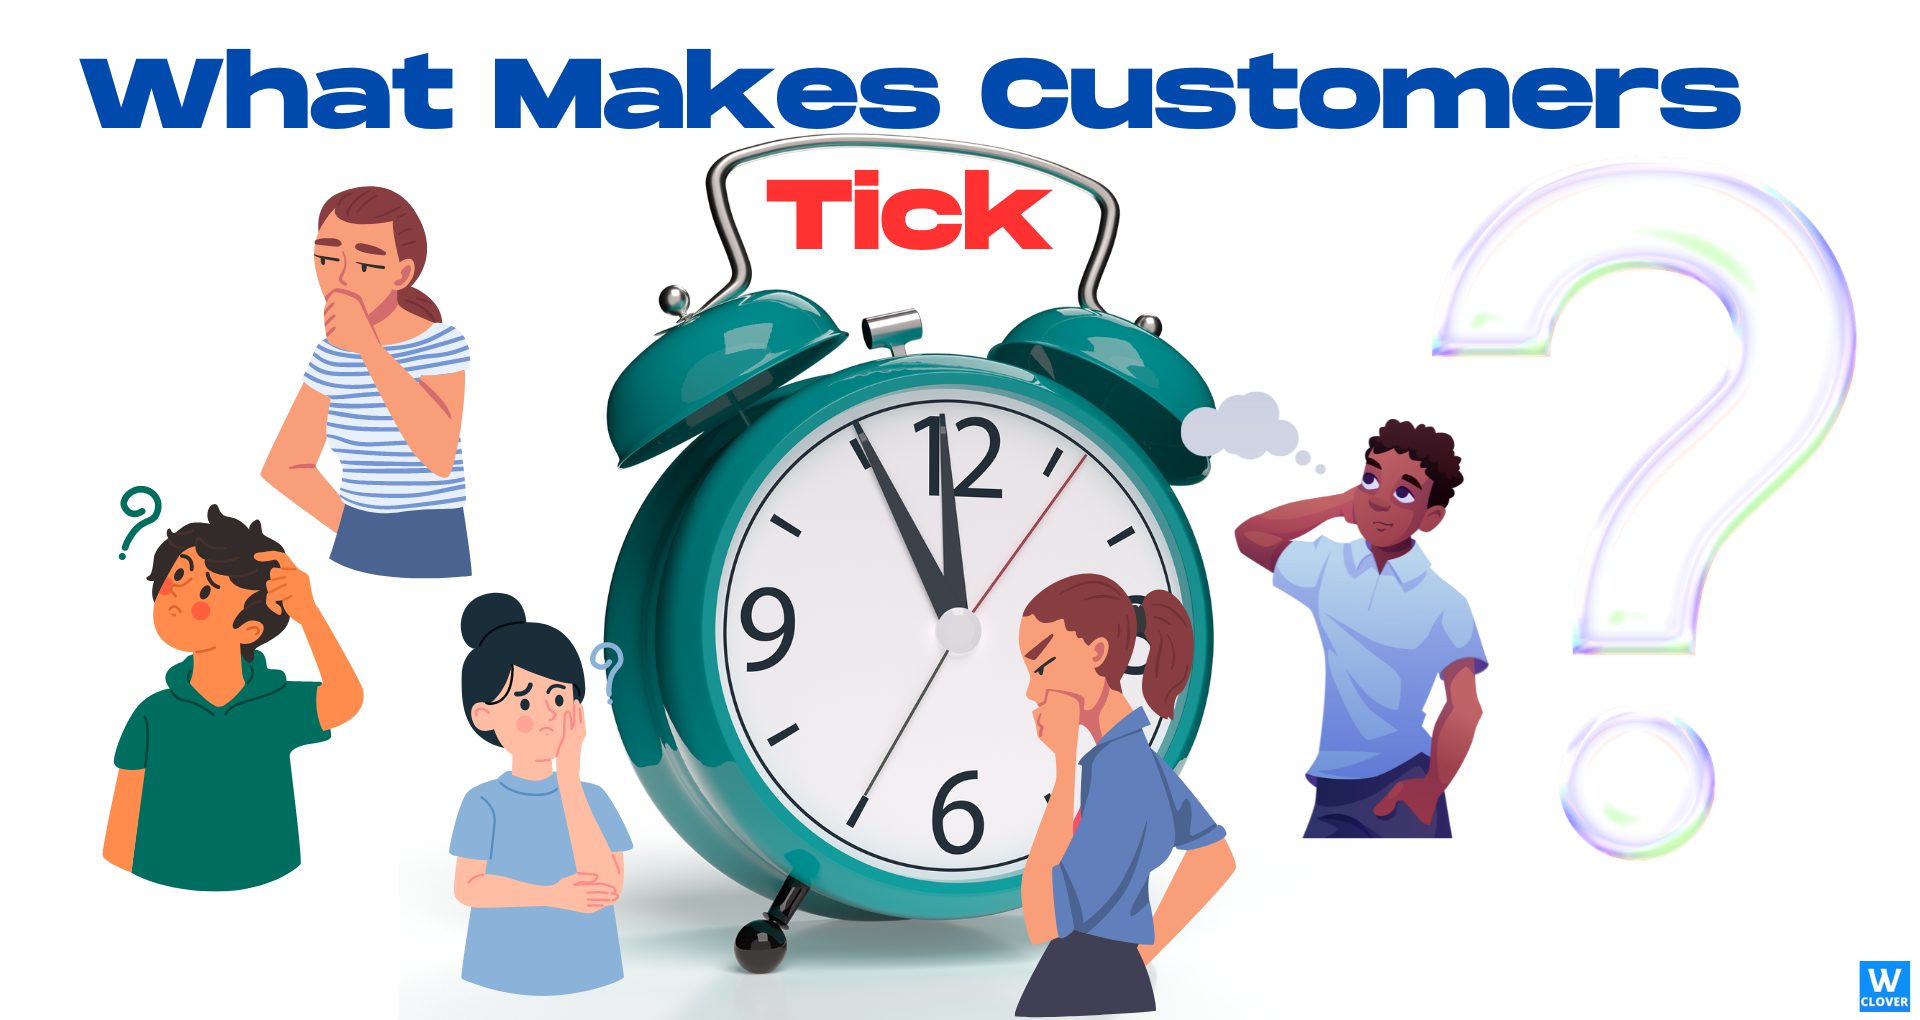 copywriting exercises -what makes customers tick